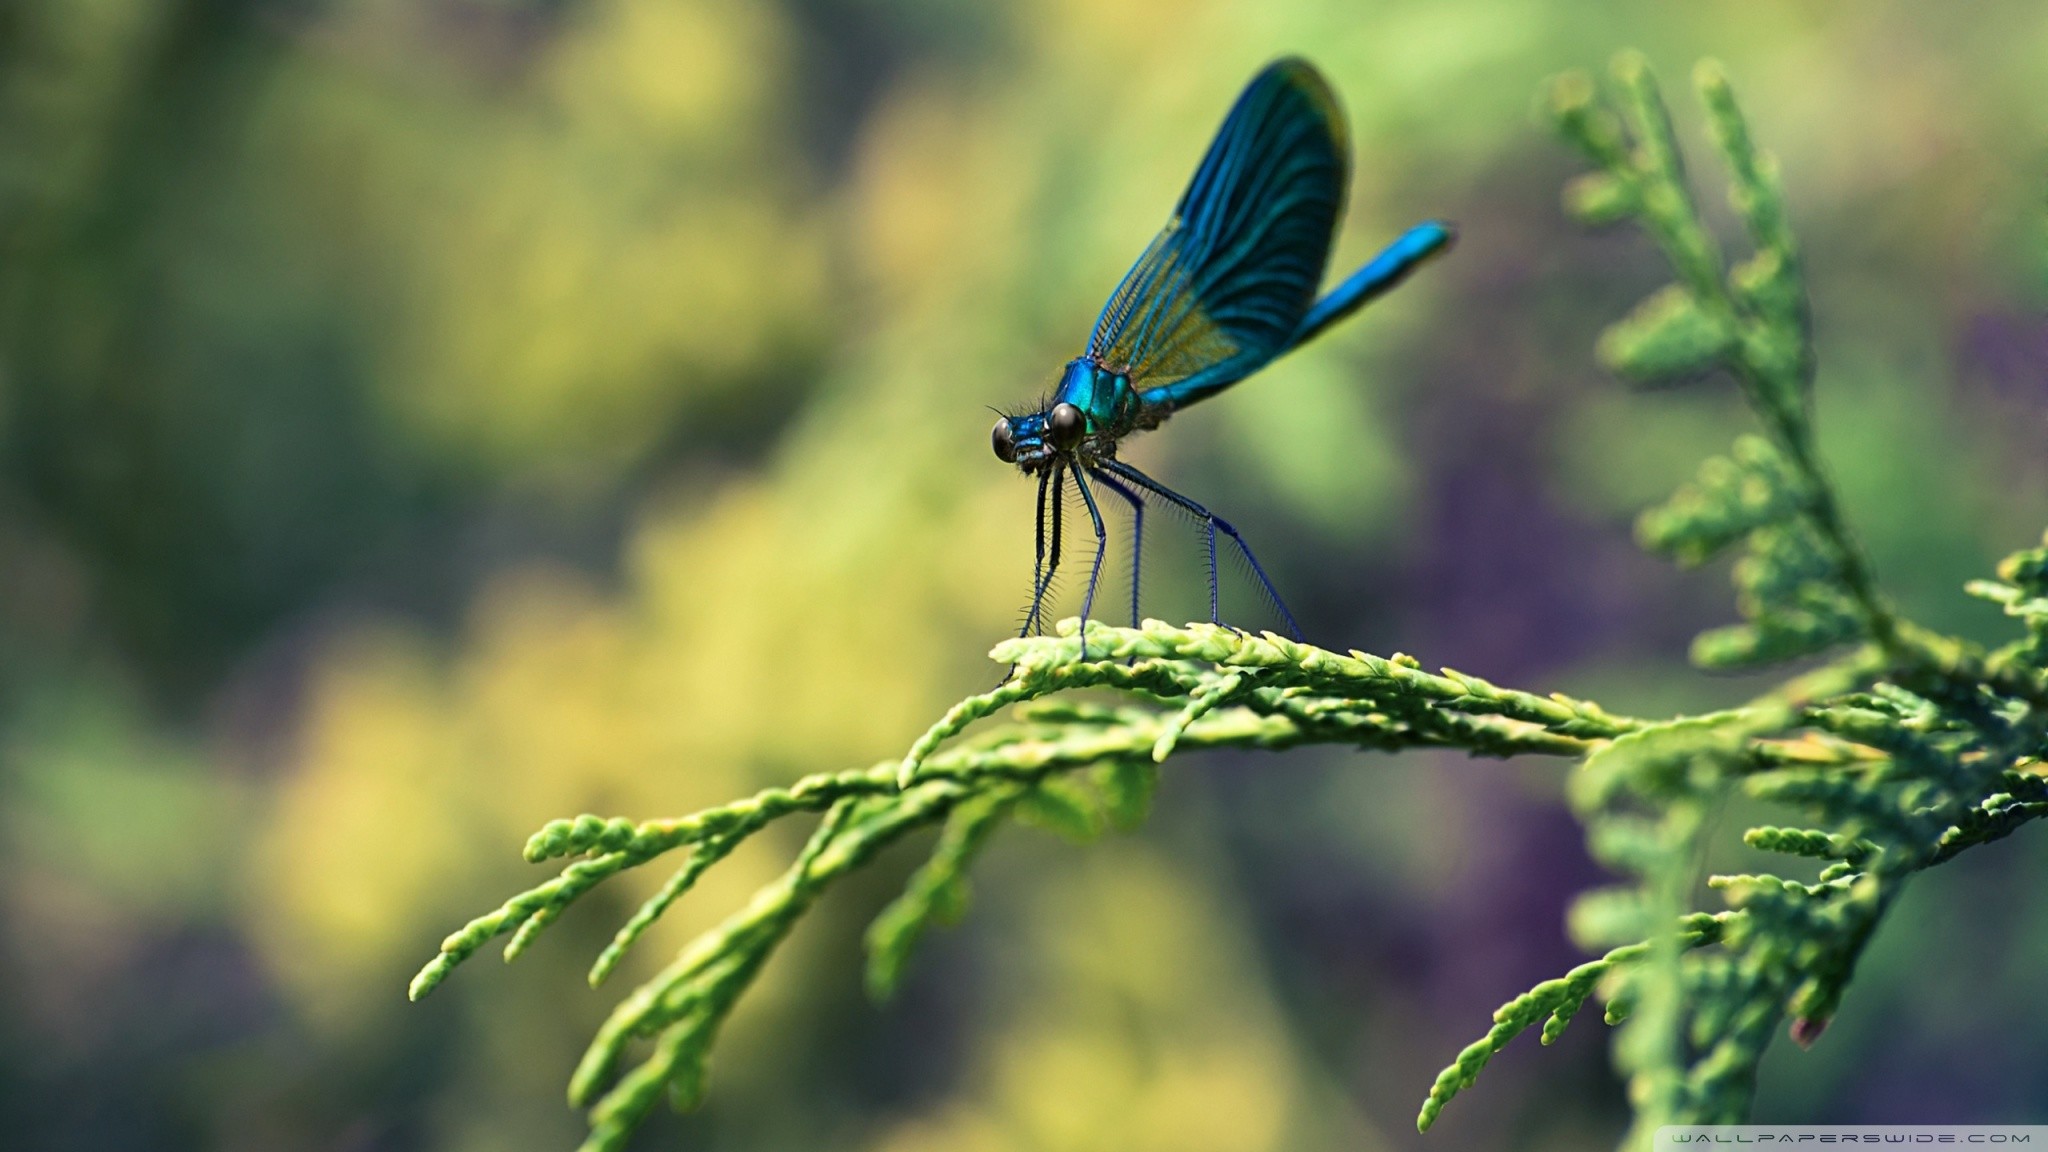 2048x1152 Dragonfly HD Wallpaper Android Apps on Google Play Ã